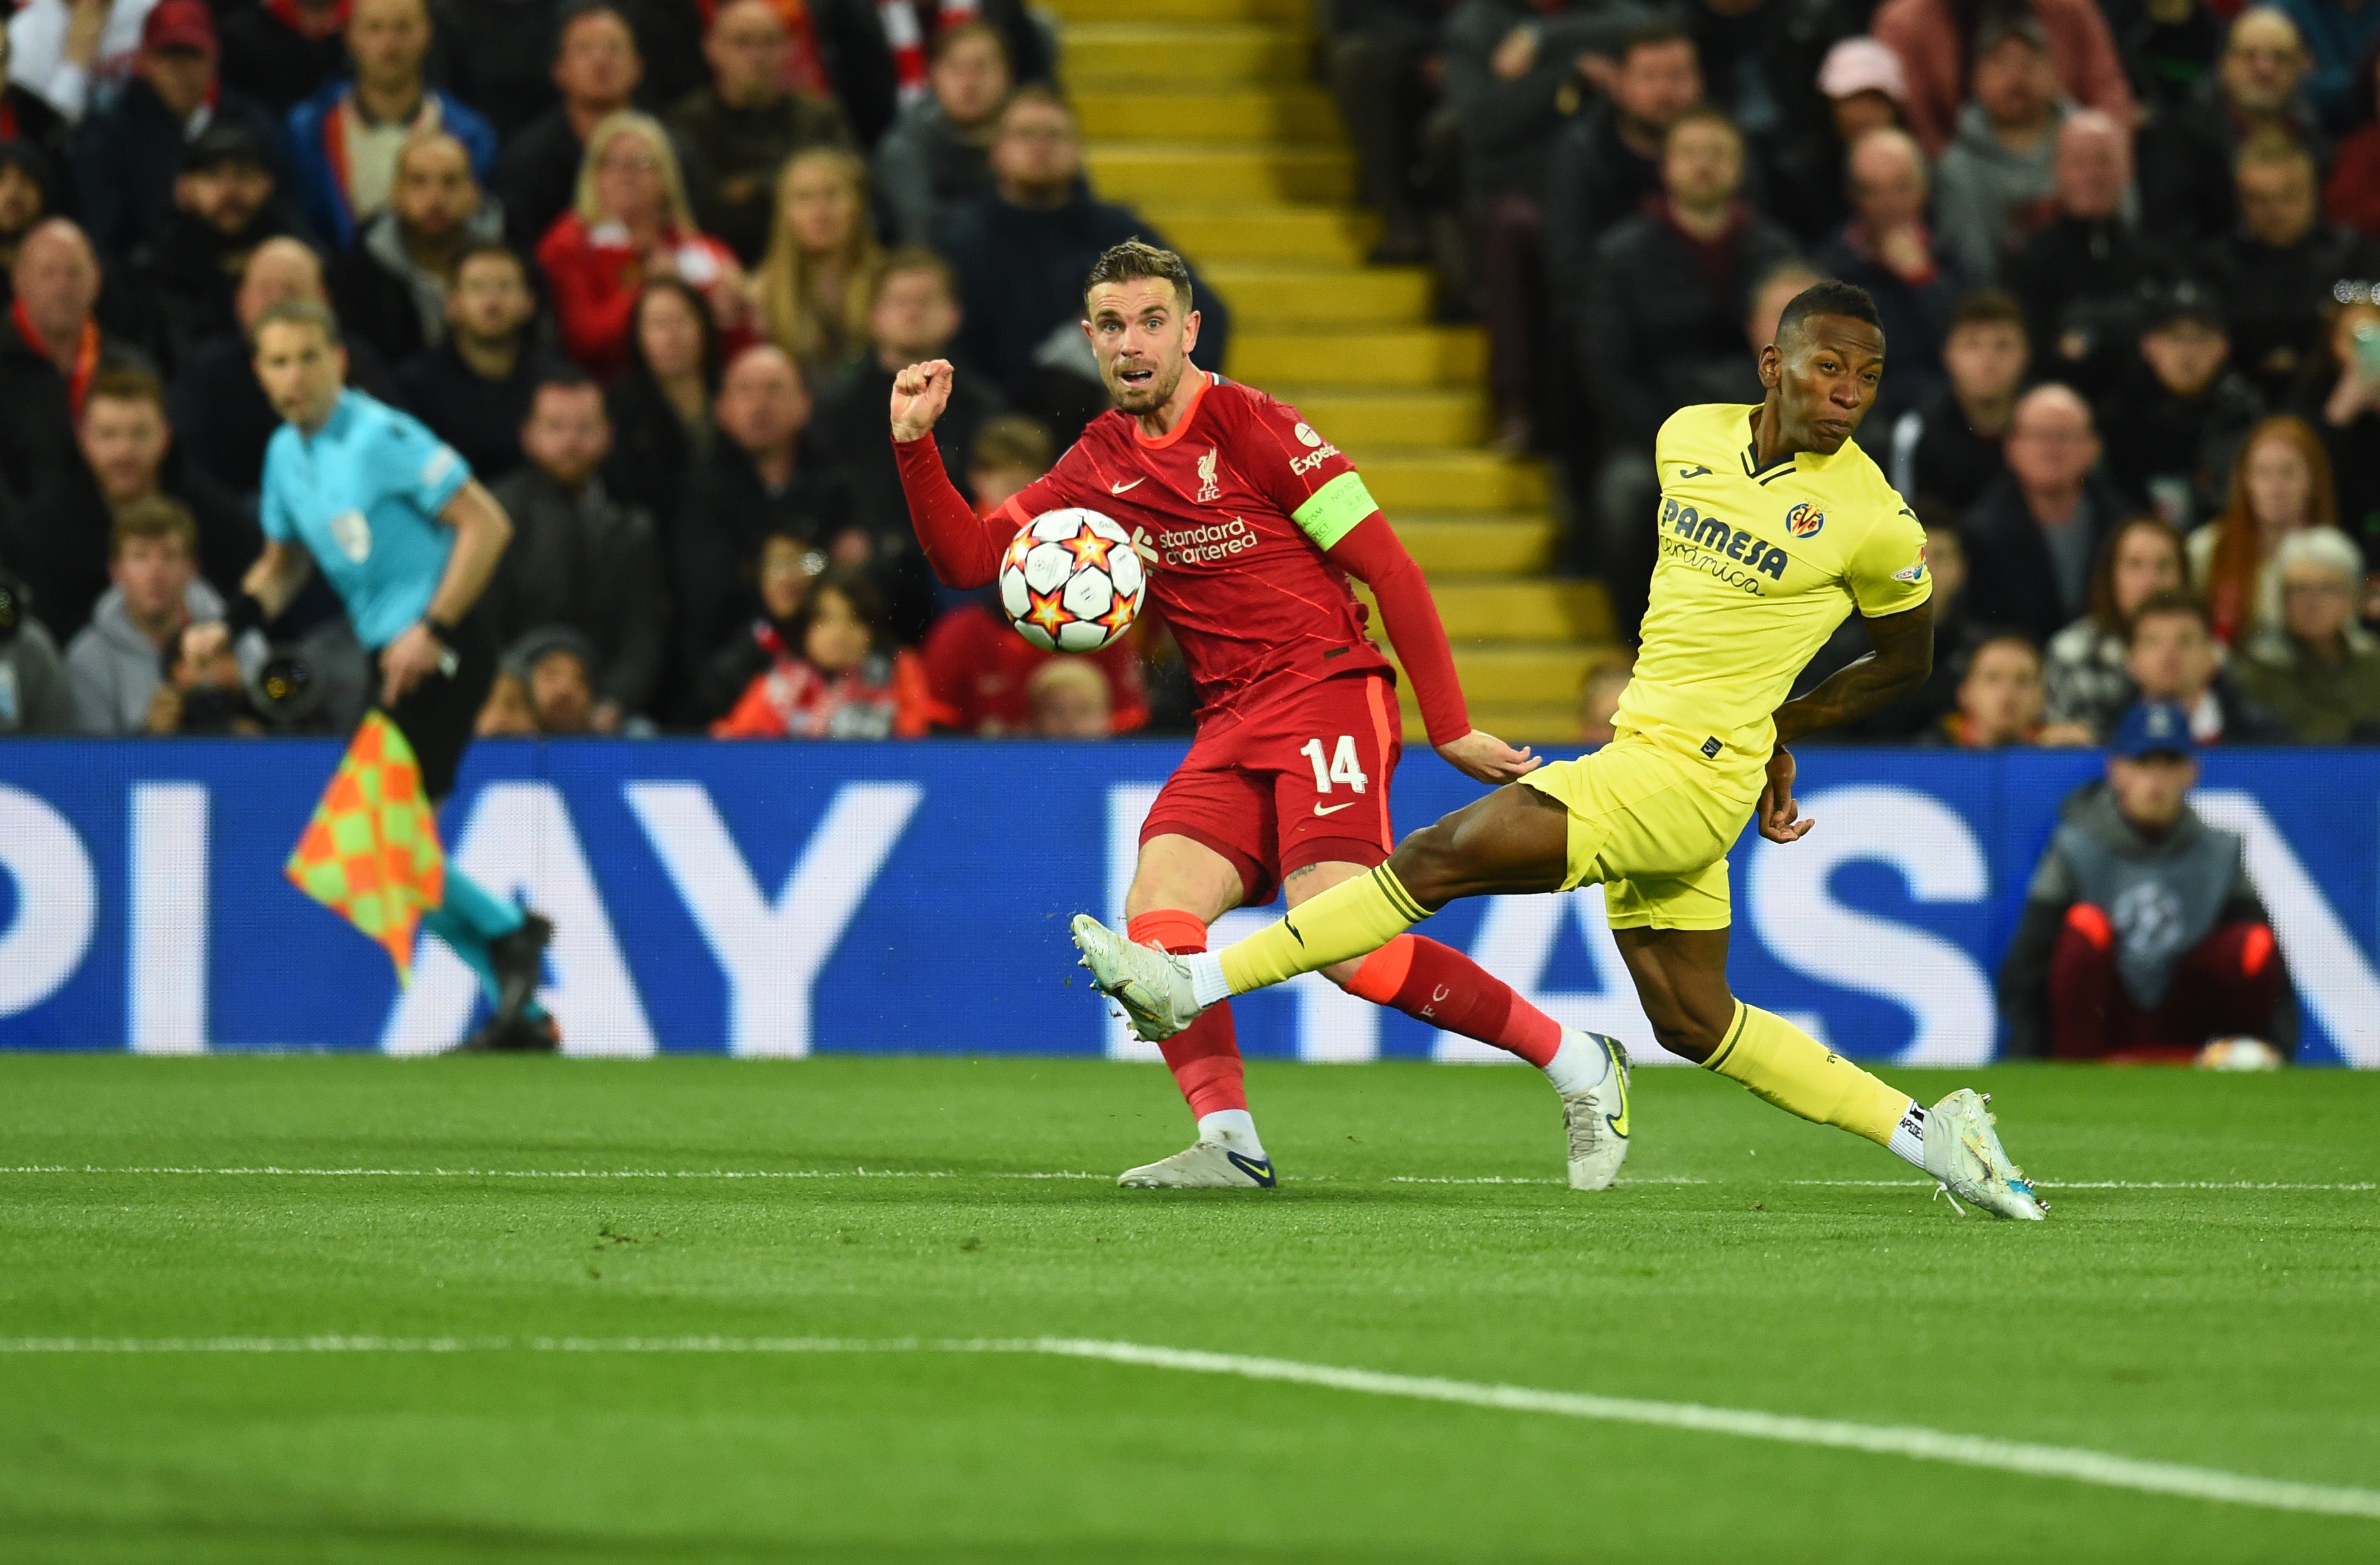 Jordan Henderson’s cross deflected in for Liverpool’s first